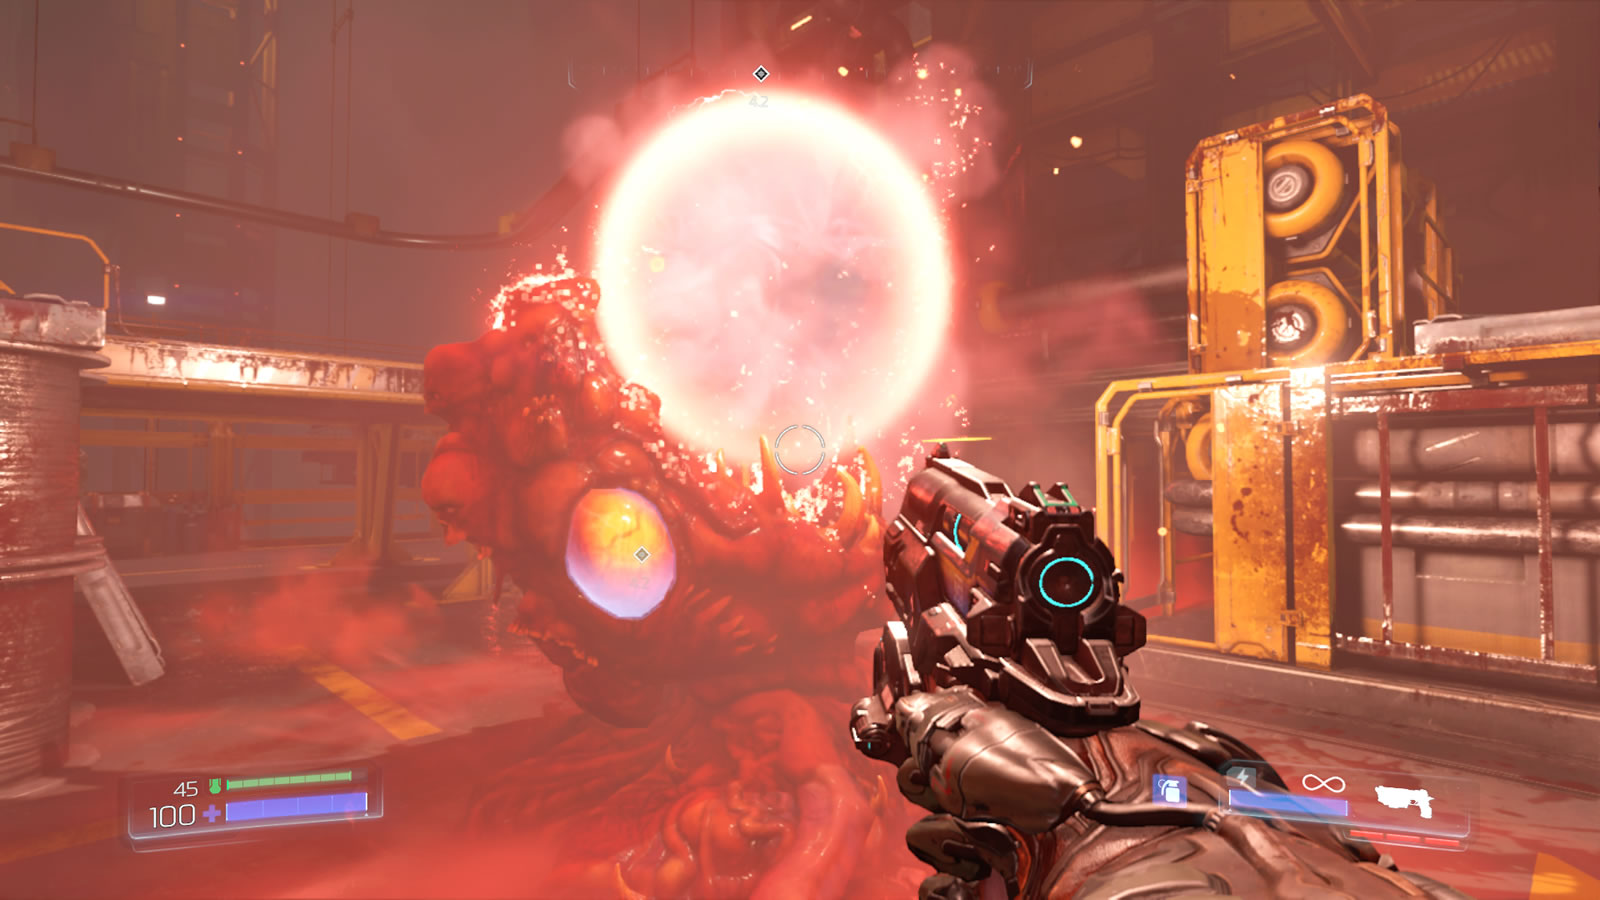 doom-2016-review-its-one-hell-of-a-game-xbox-one-03